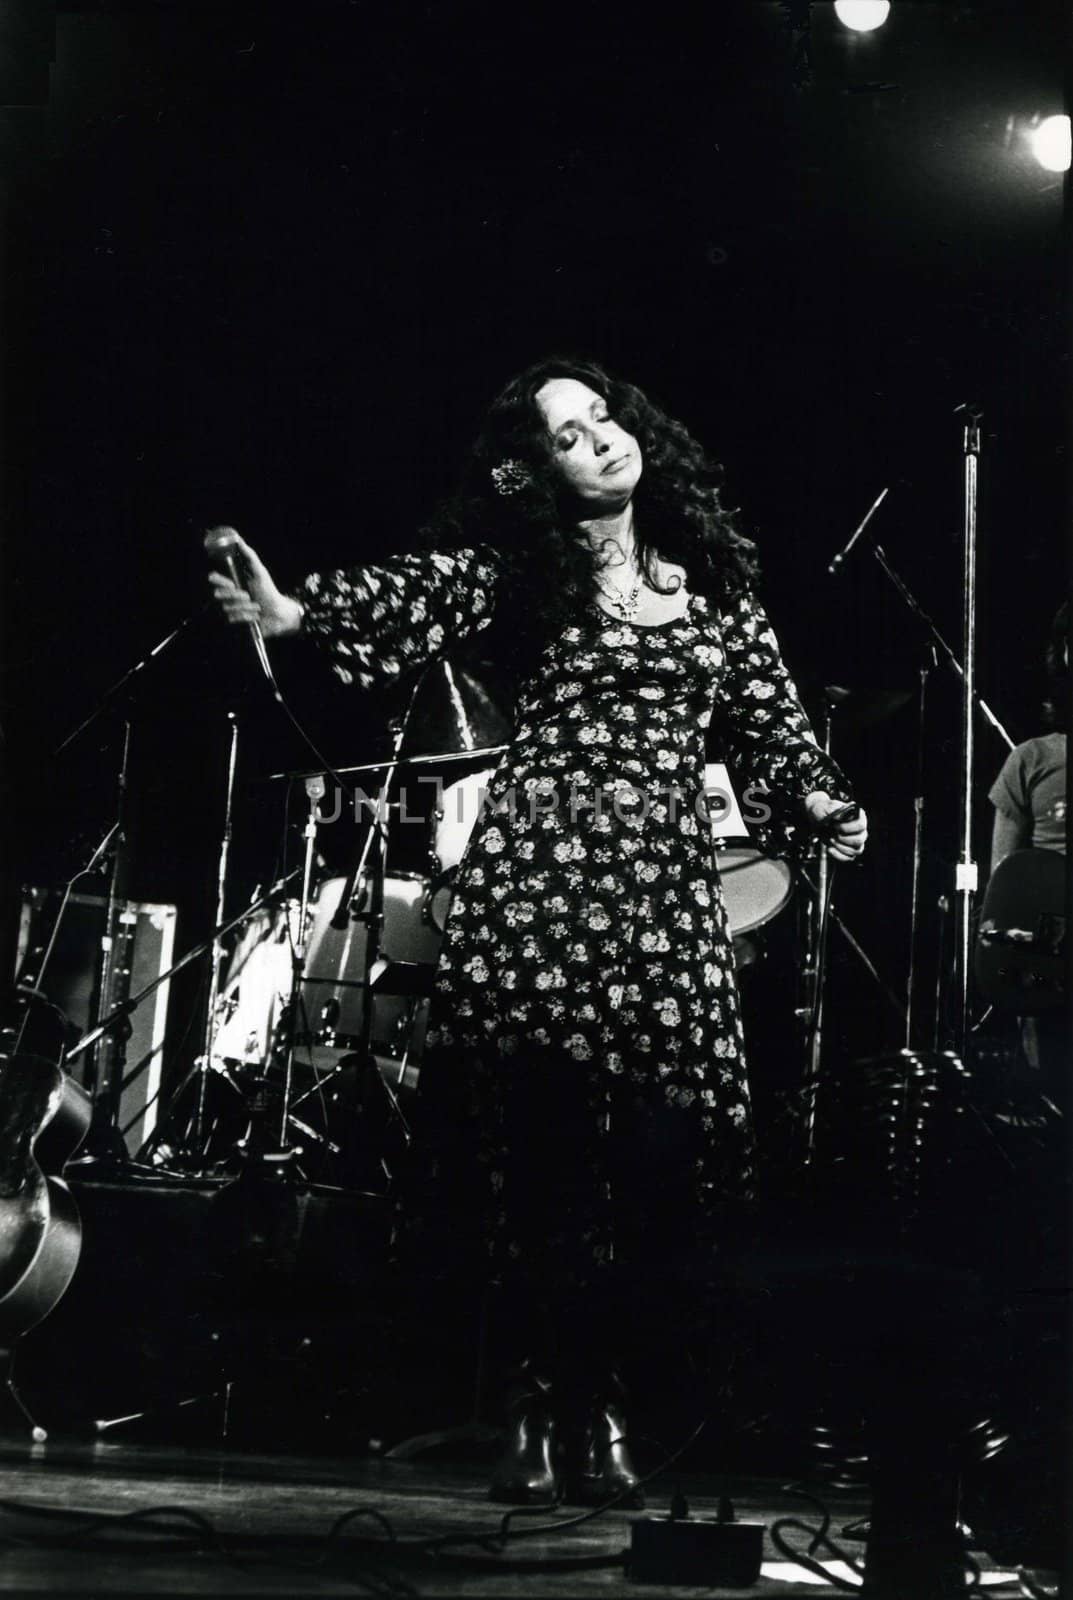 Maria Muldaur singing at a Symphony Hall performance in Boston, MA on April 18,1978